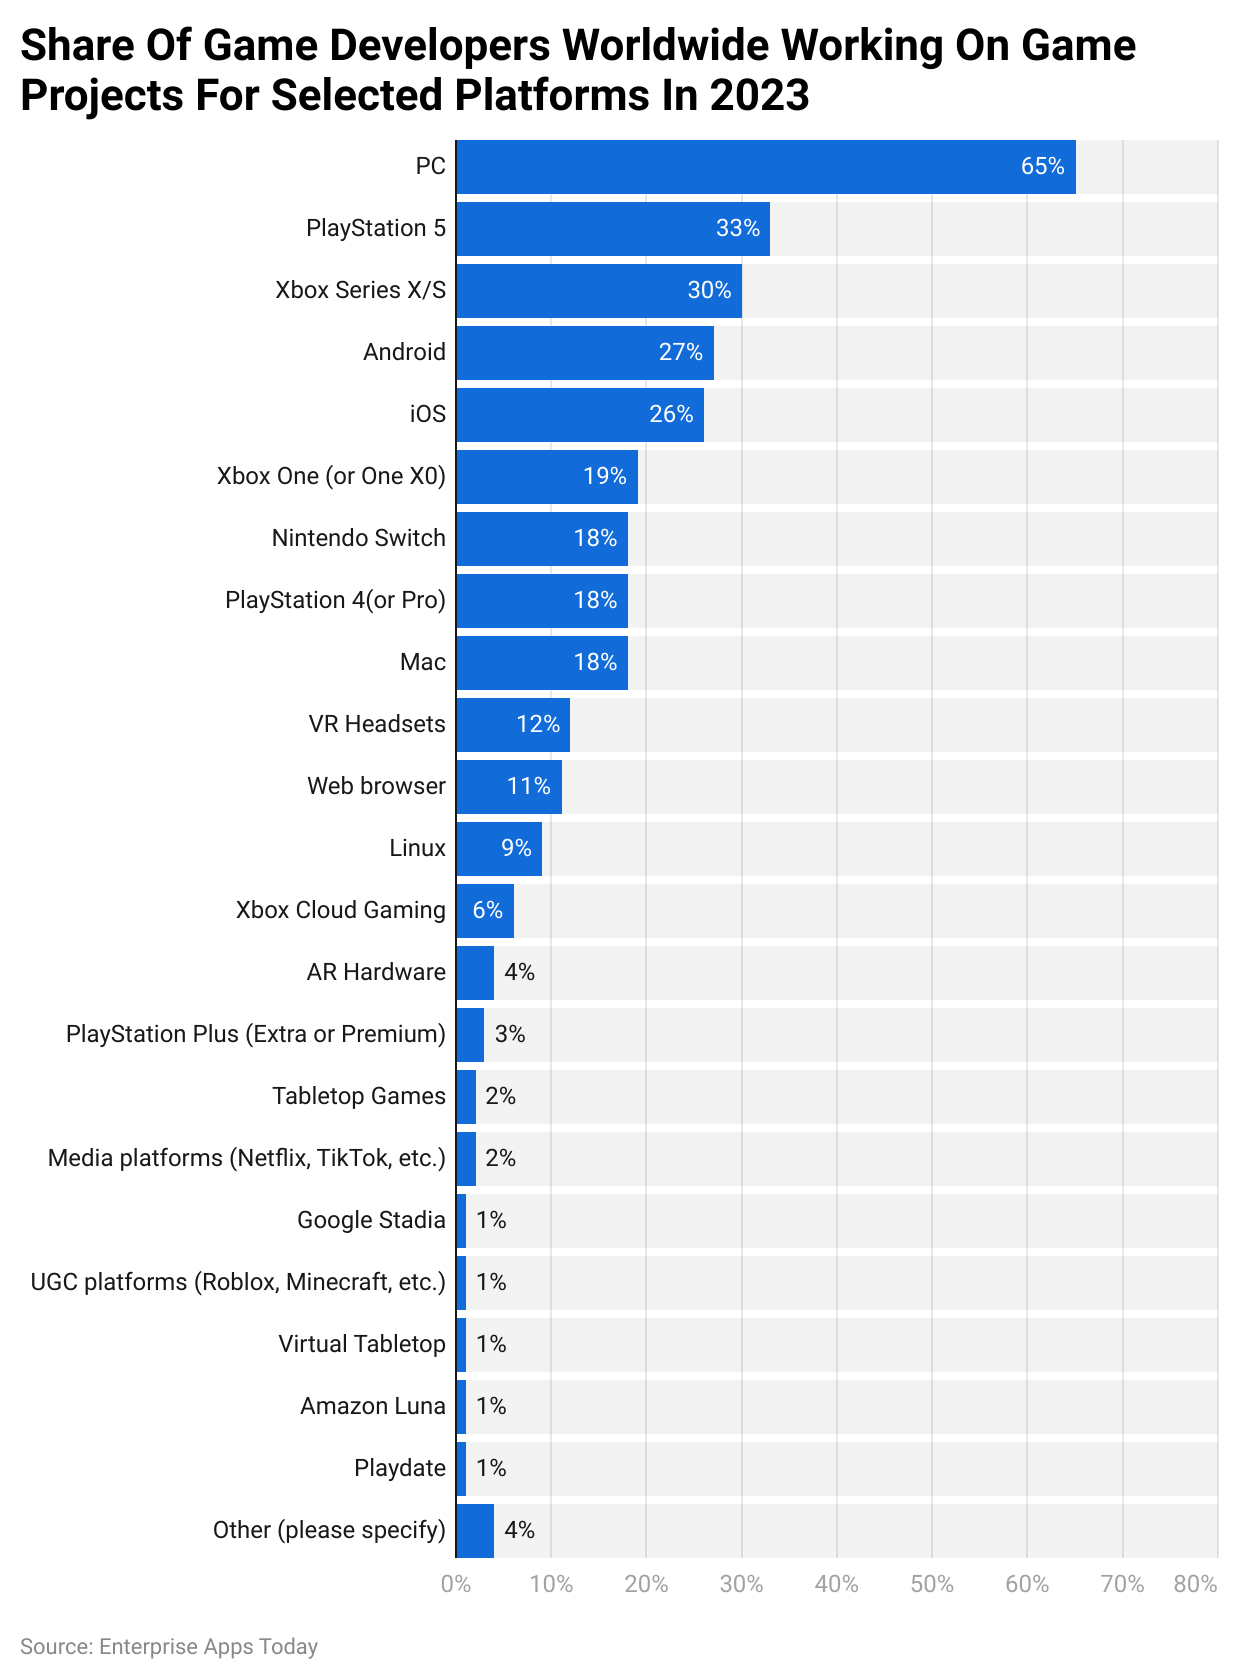 Share of game developers worldwide working on game projects for selected platforms in 2023